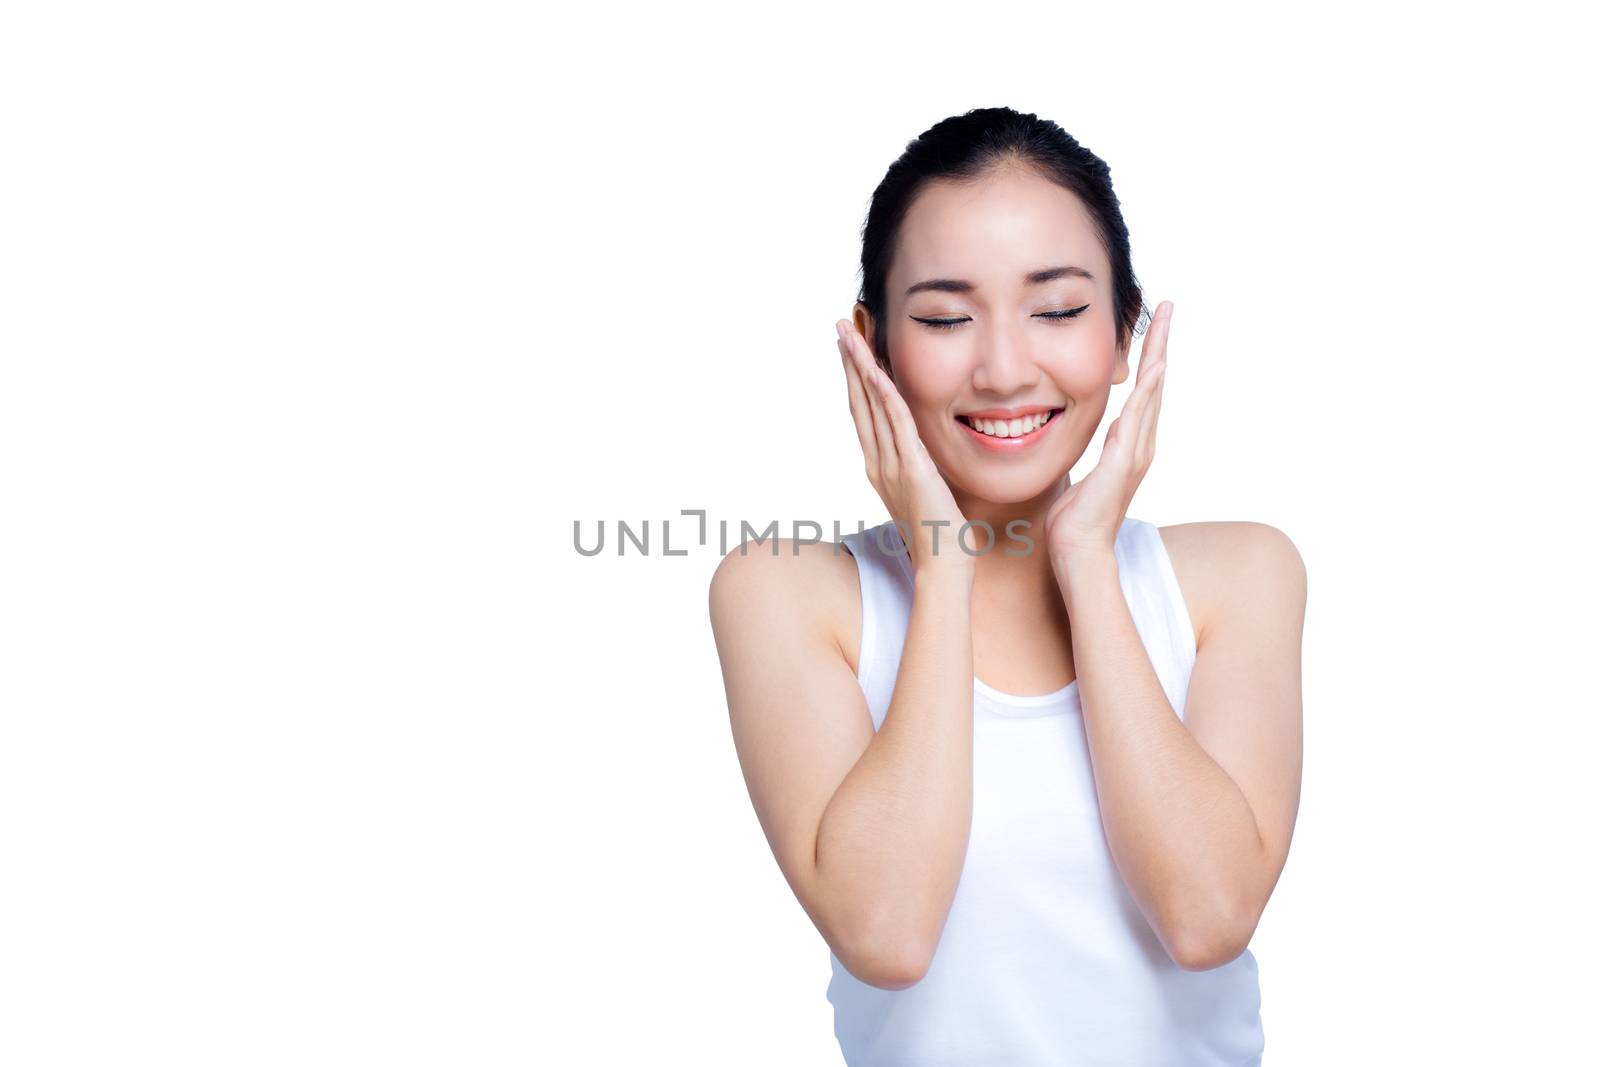 Beauty model woman with hands on cheeks looking at camera with a smile expression in a beauty and skincare concept. Perfect skin with makeup. Portrait isolated on white with copy space